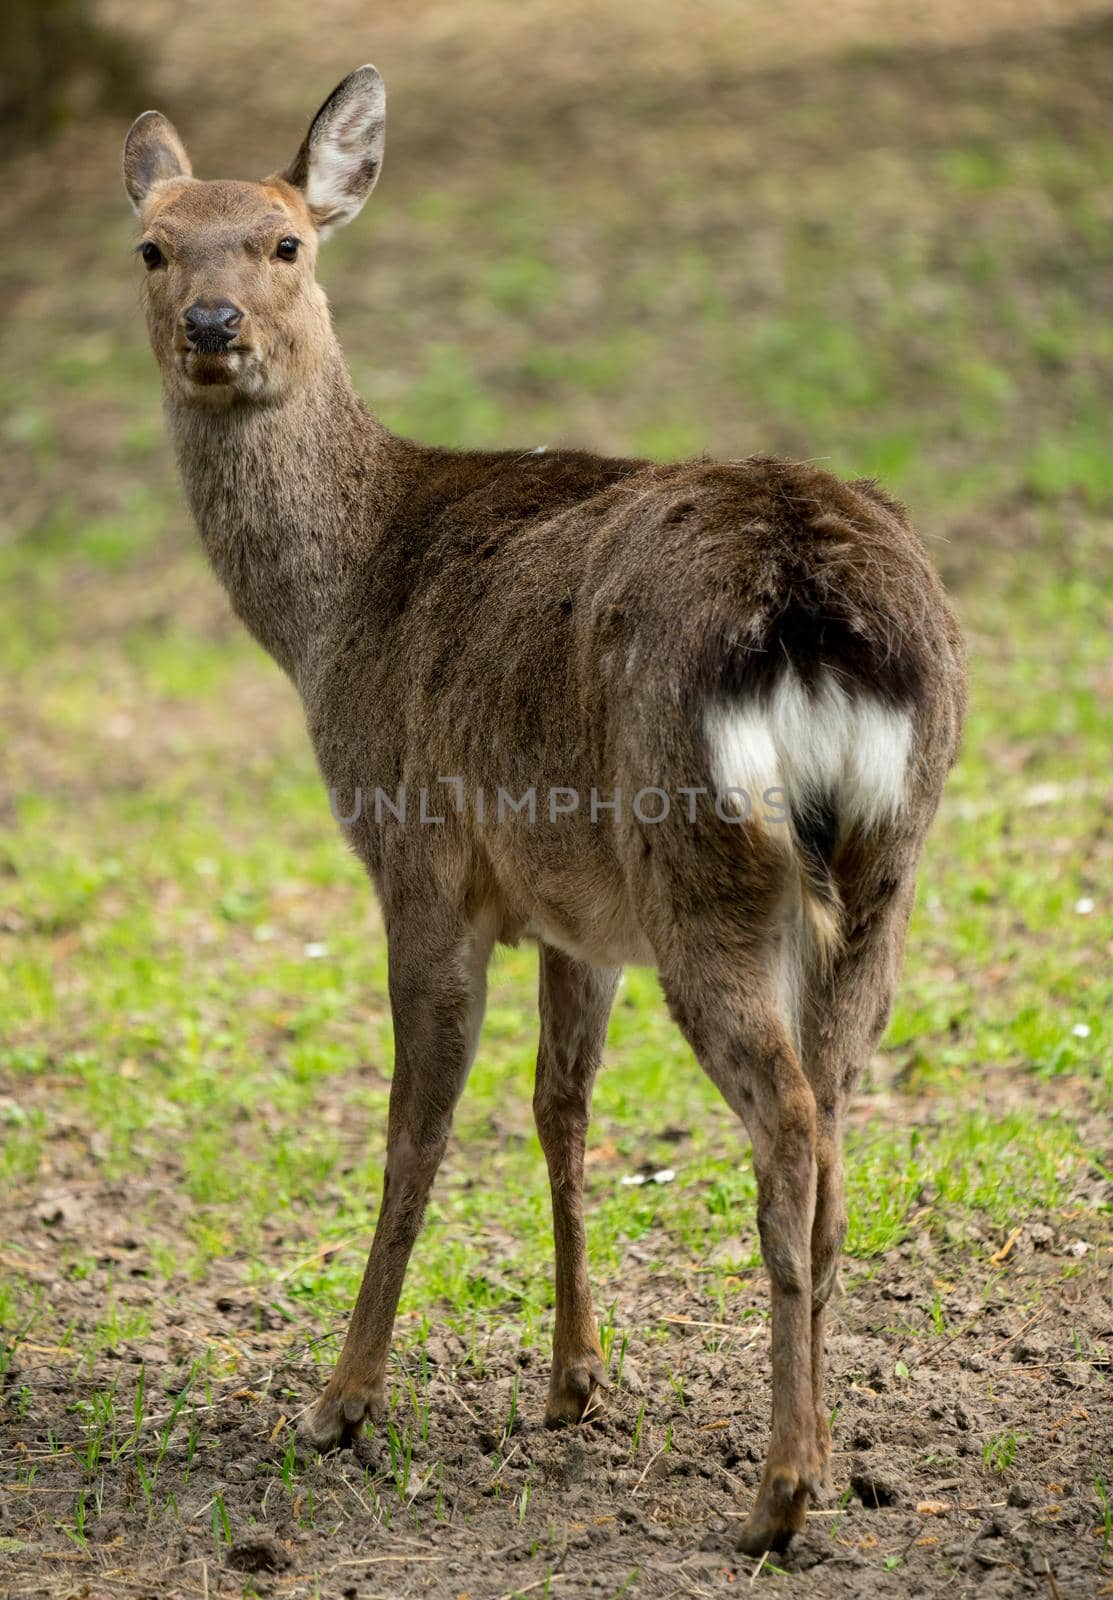 Sika deer Cervus nippon also known as the spotted deer female portrait. Wildlife and animal photo. Japanese deer